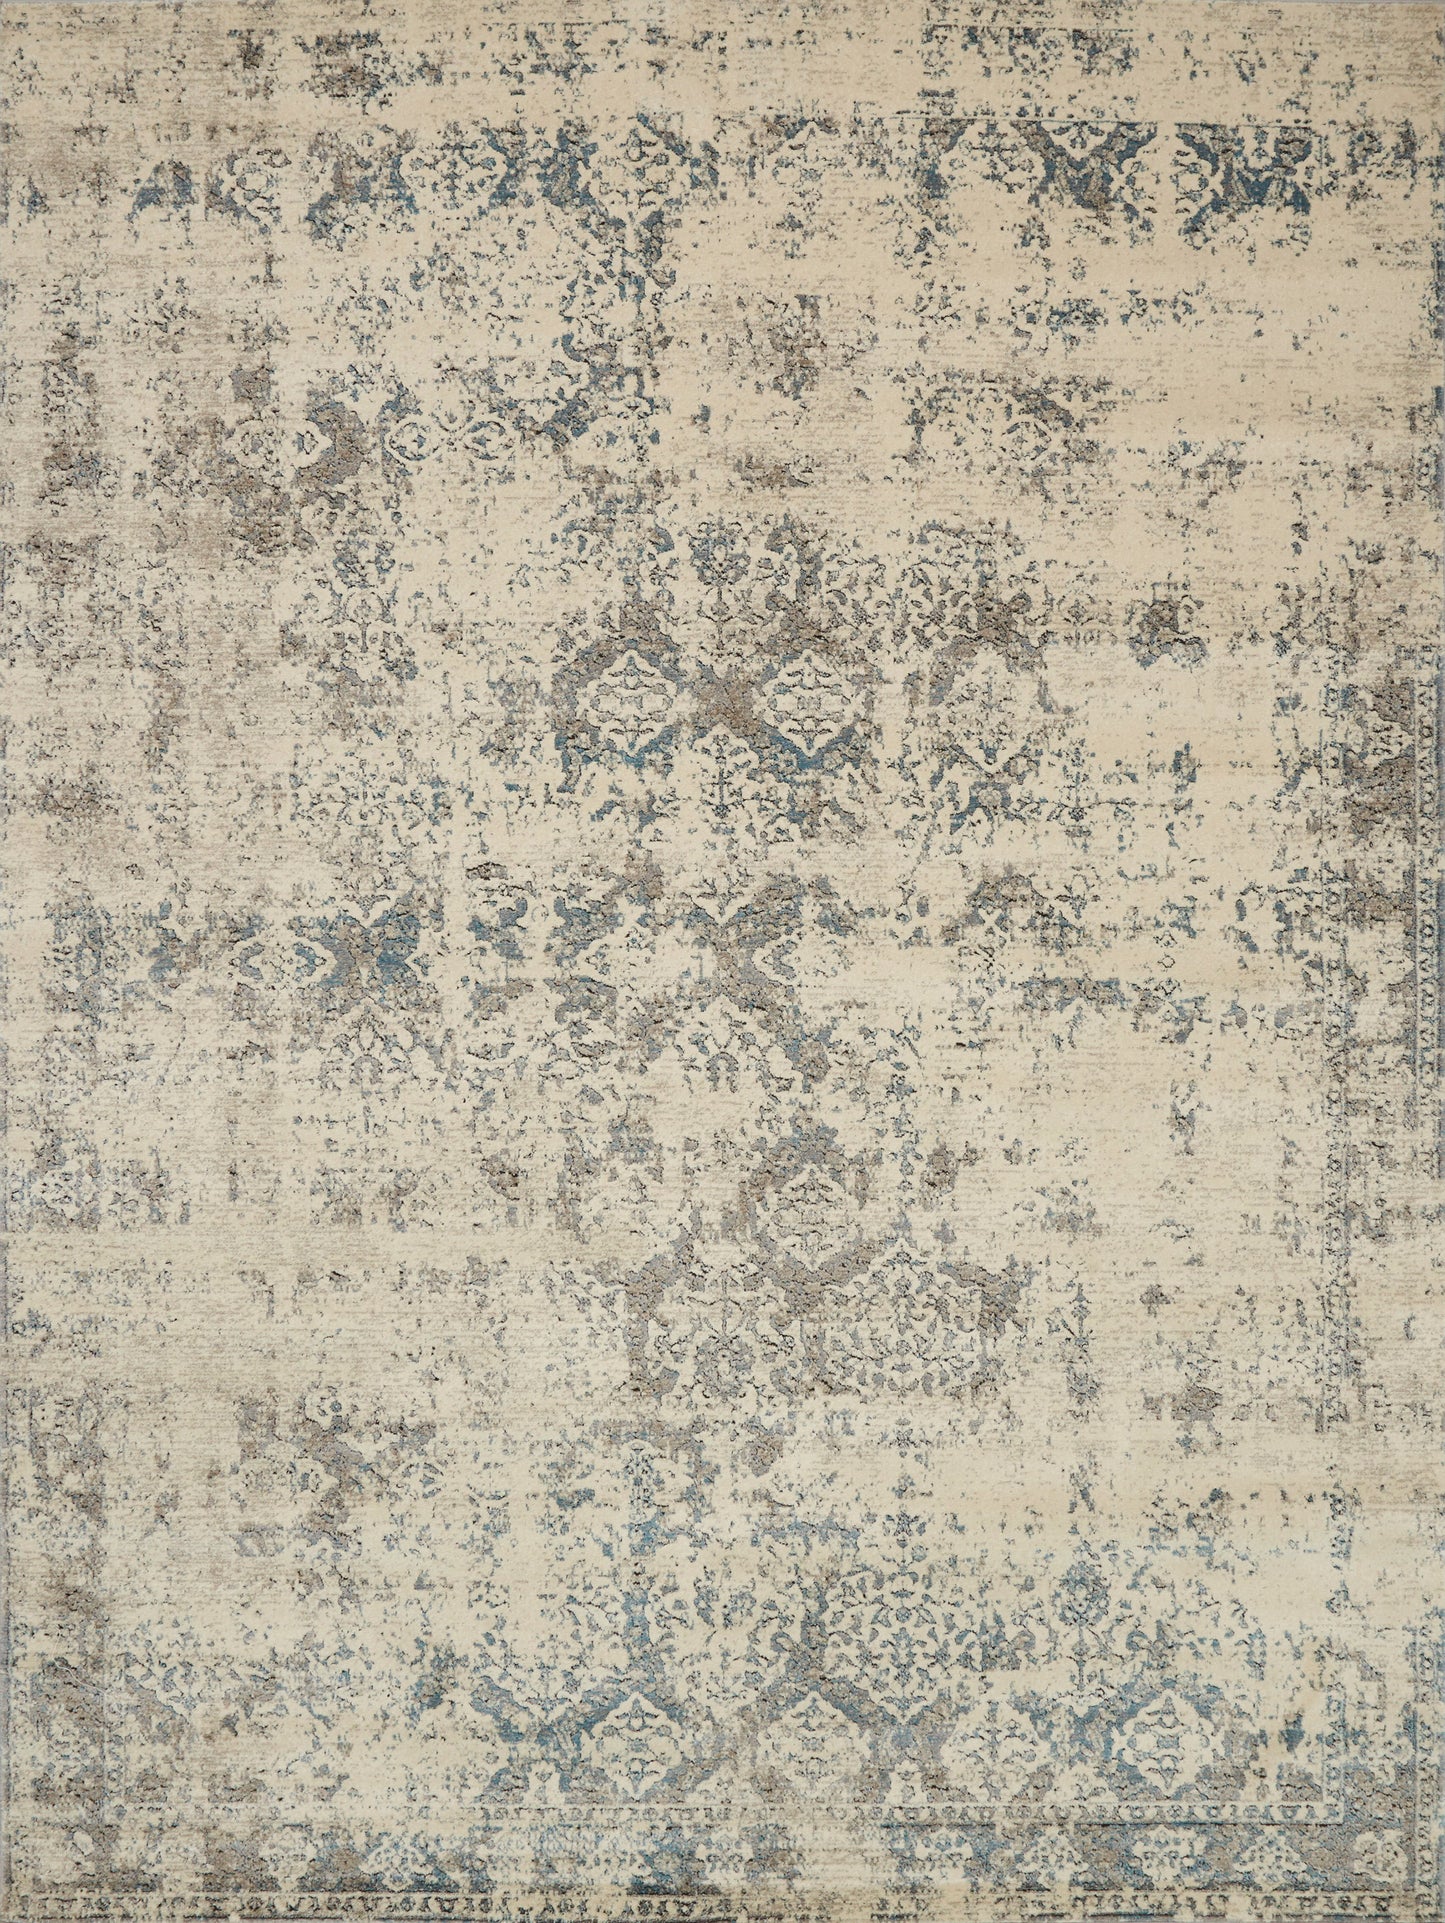 A picture of Loloi's Millennium rug, in style MV-05, color Ivory / Grey